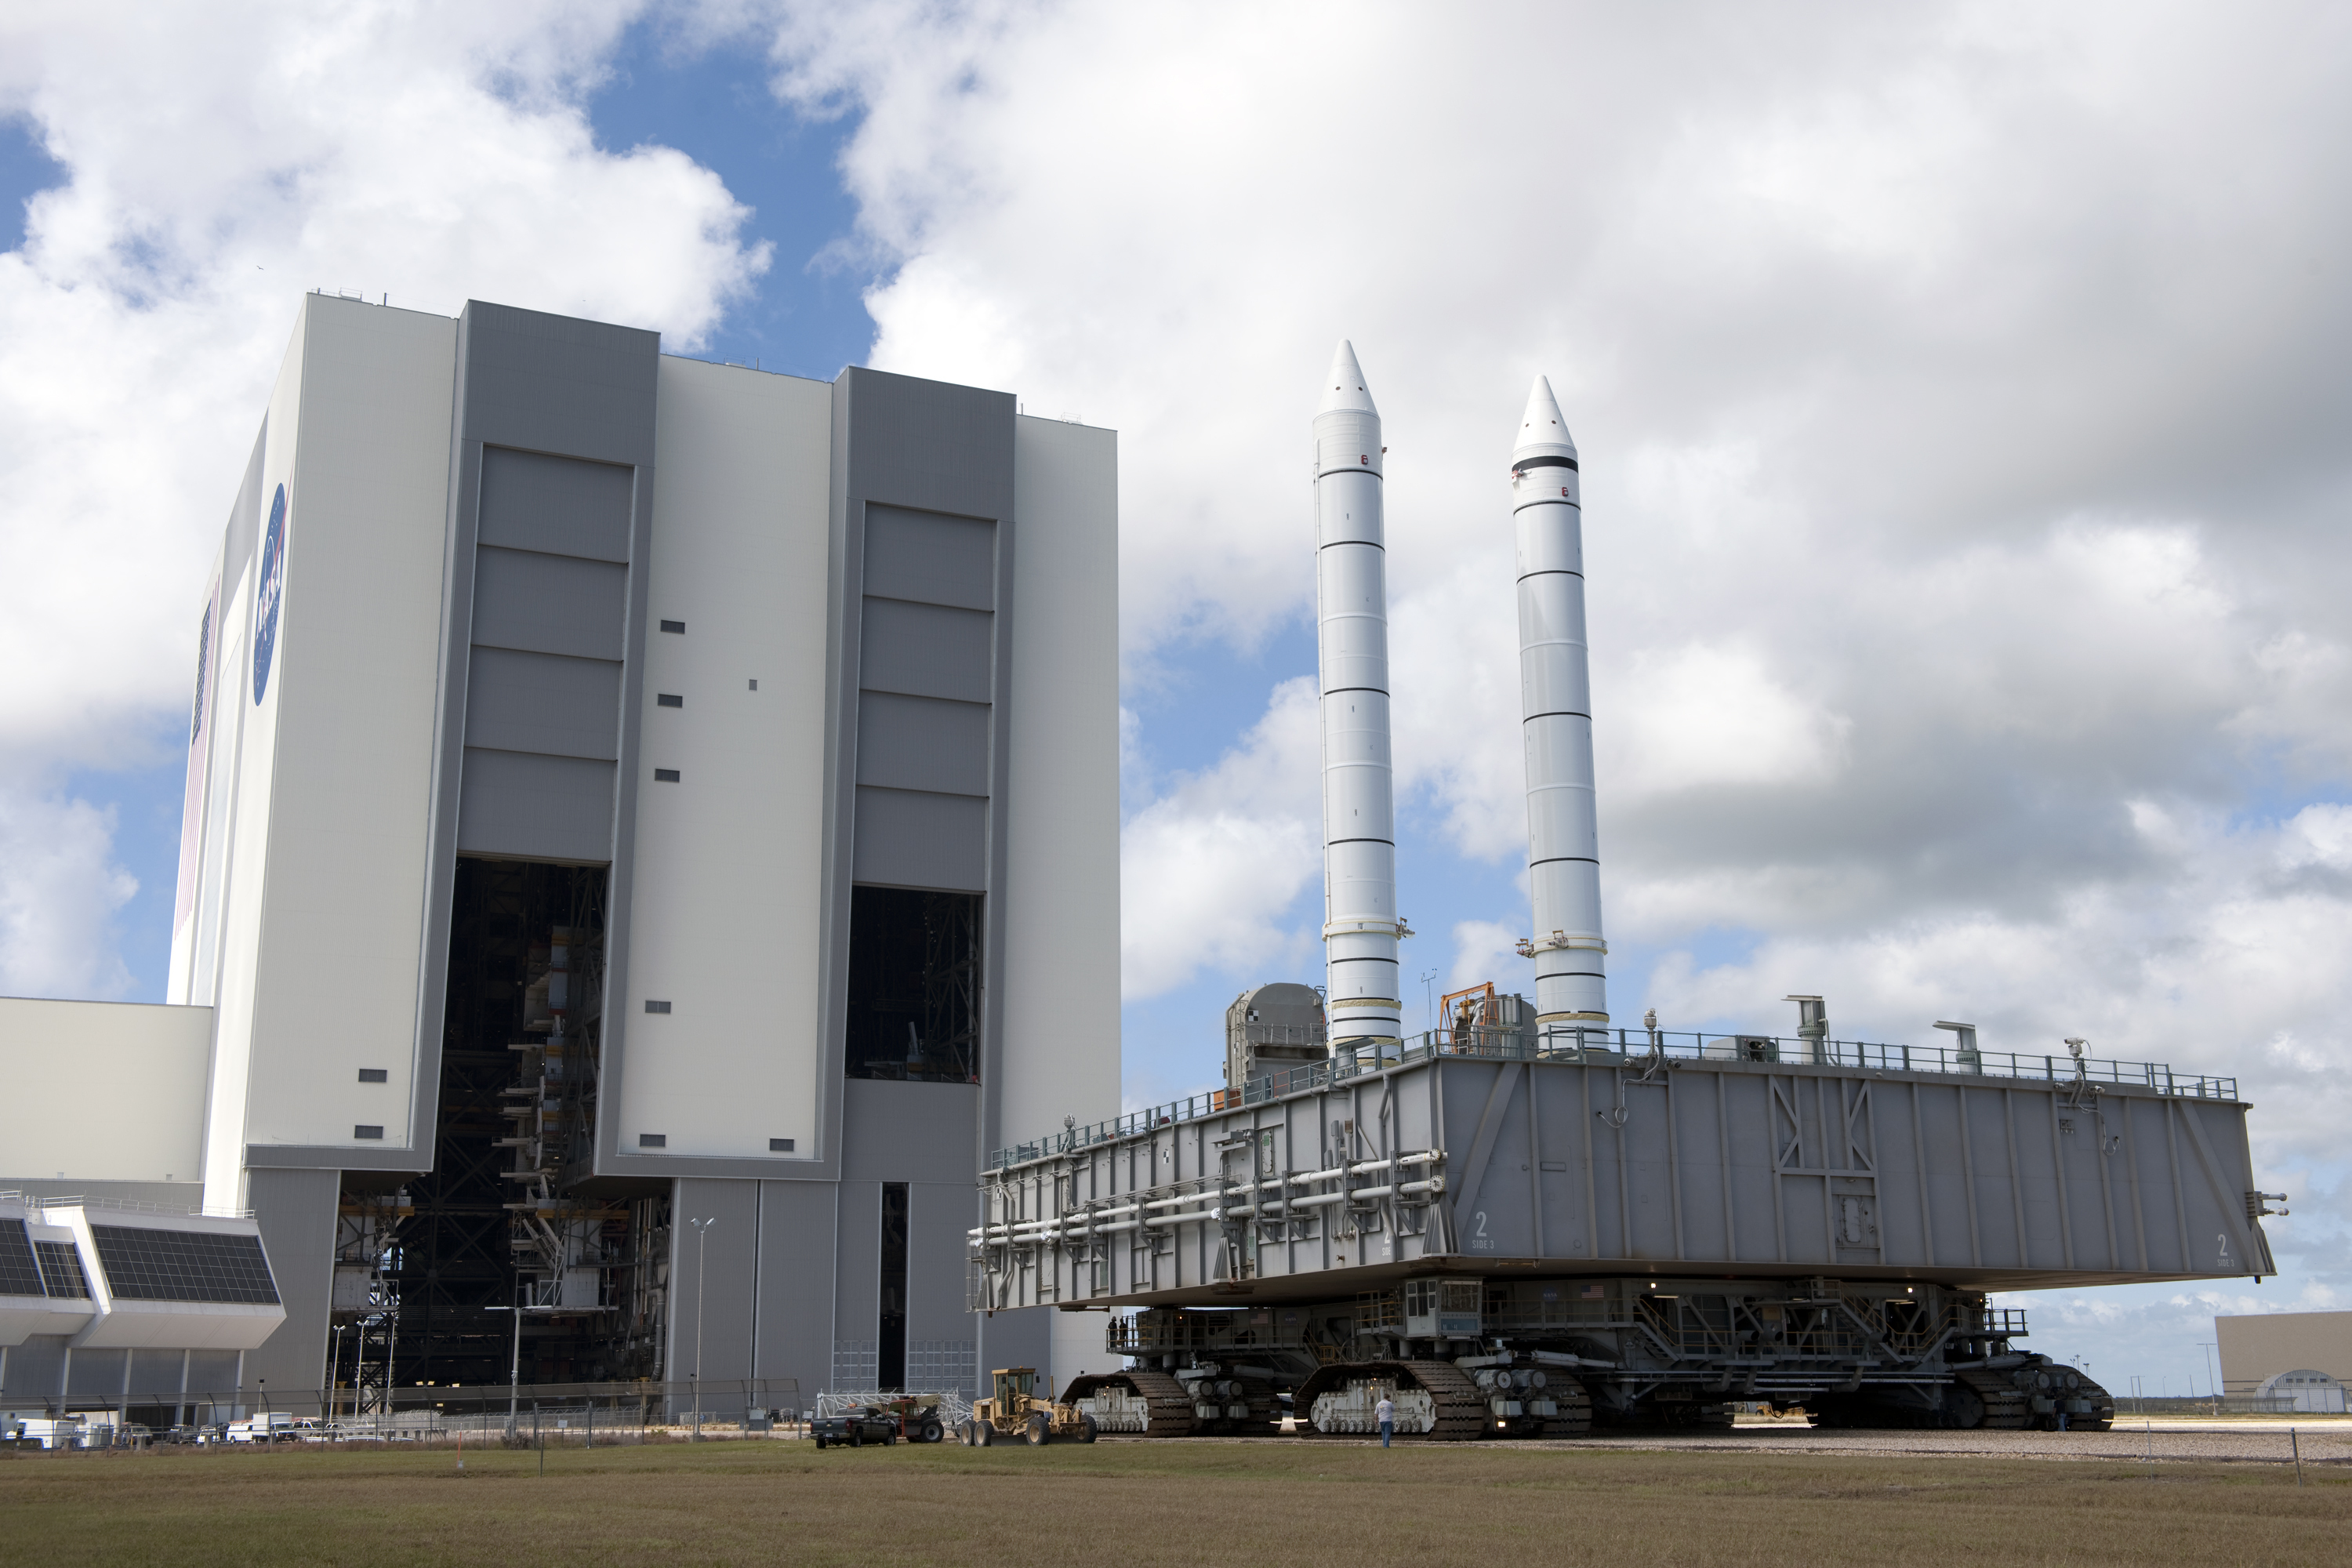 STS-134 Mobile Launcher Platform with two Solid Rocket Boosters